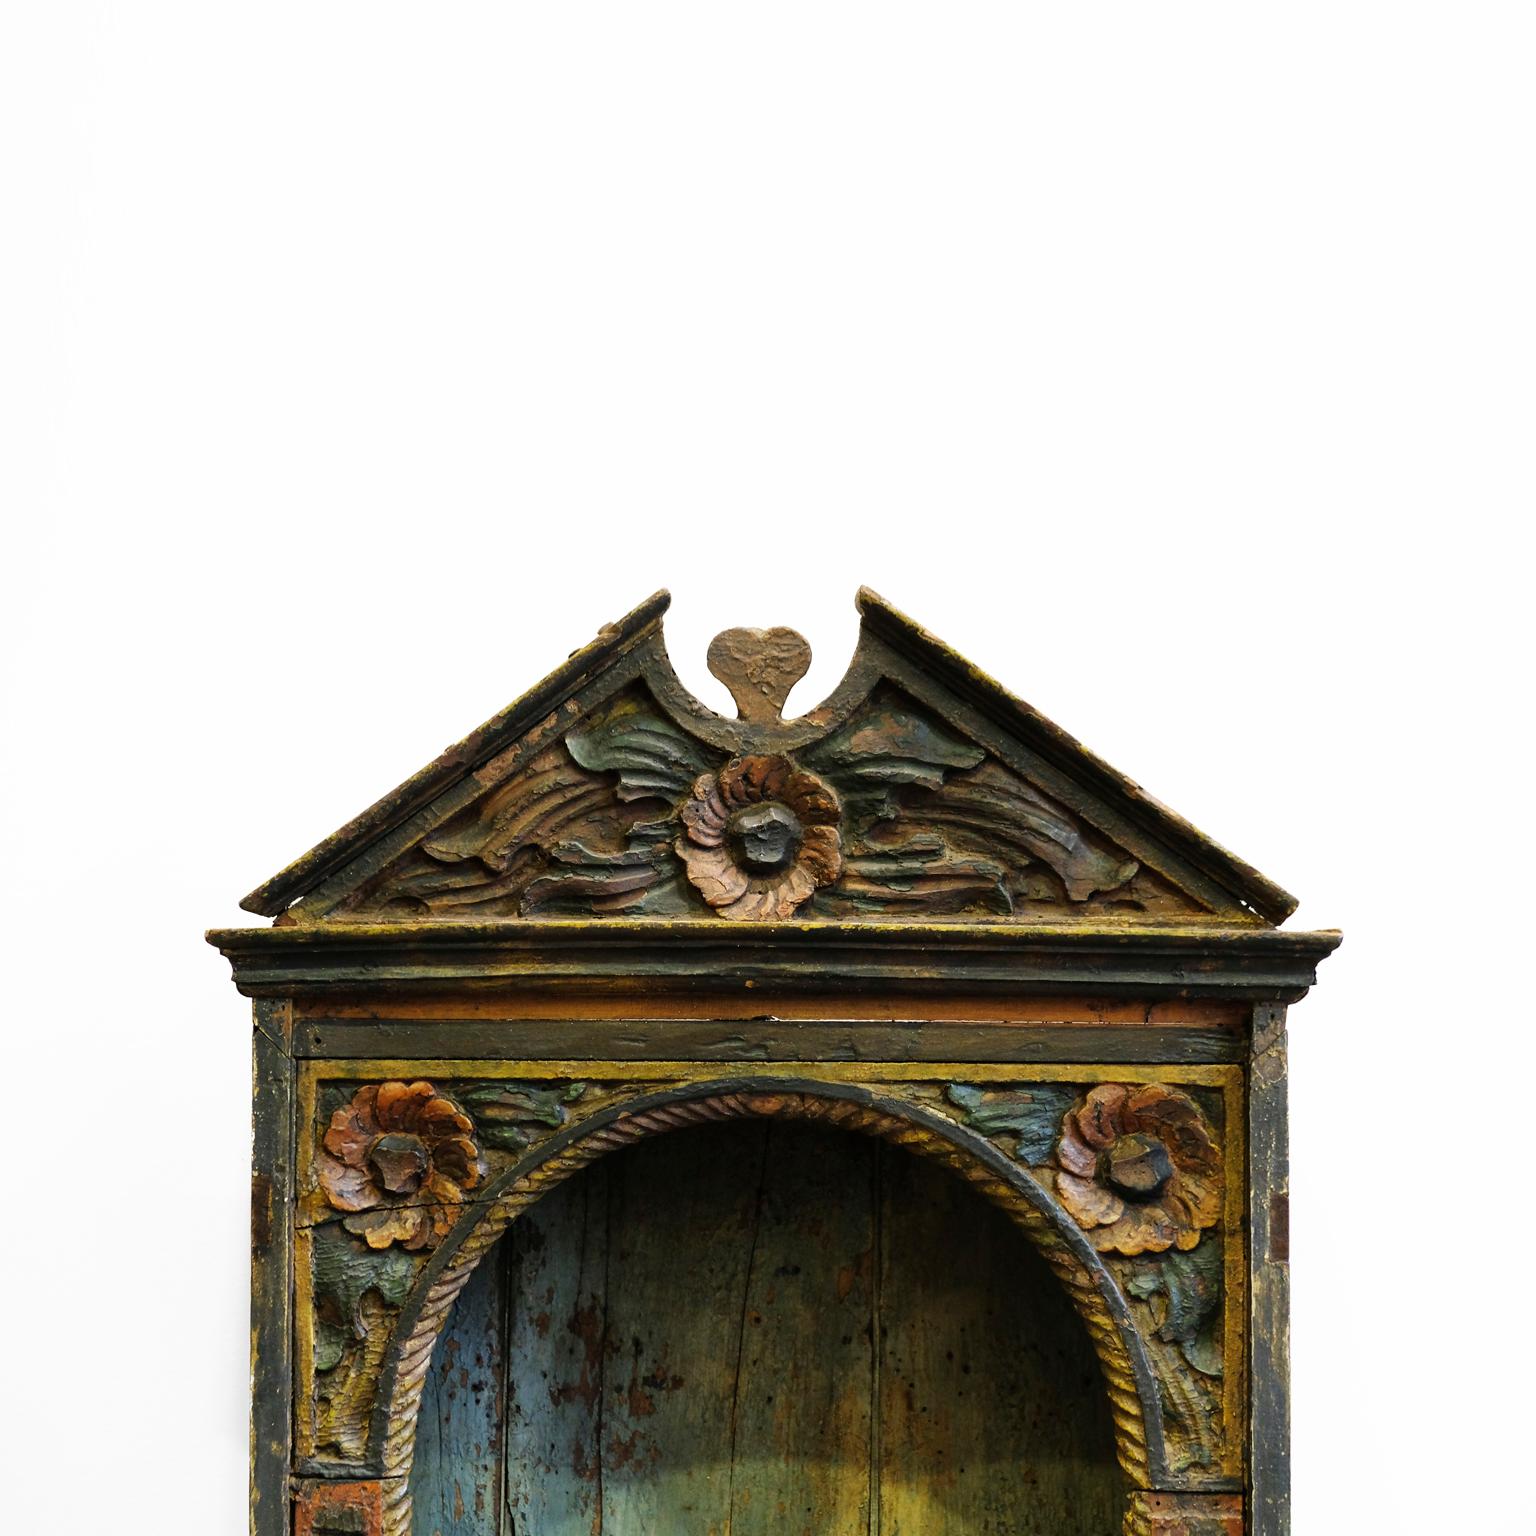 Portuguese Oratory of XVII century, in rustic wood carved manually in the form of gold wreaths and red roses. Probably of colonial origin, it resembles the Spanish Colonial style. The original background boards with aged blue paint. The iron nails